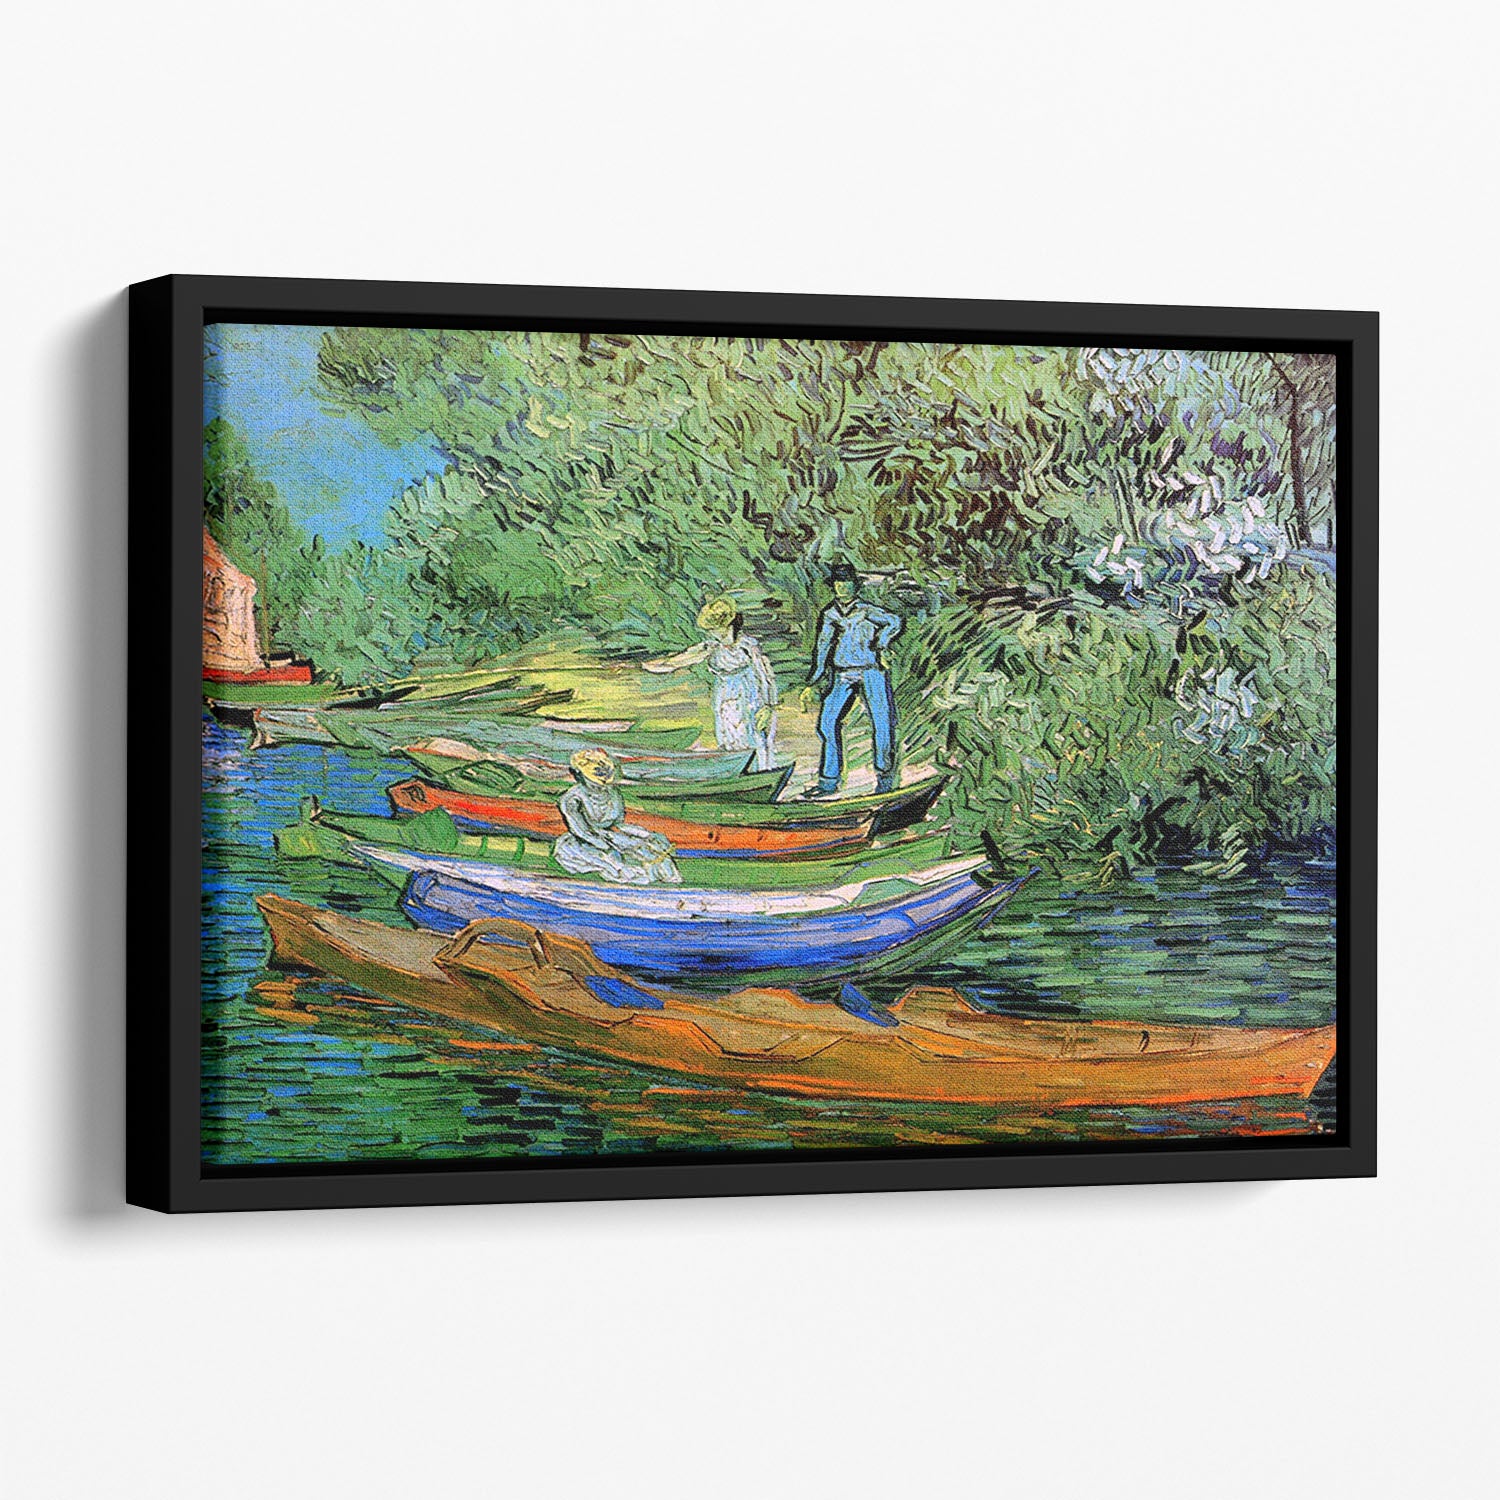 Bank of the Oise at Auvers by Van Gogh Floating Framed Canvas